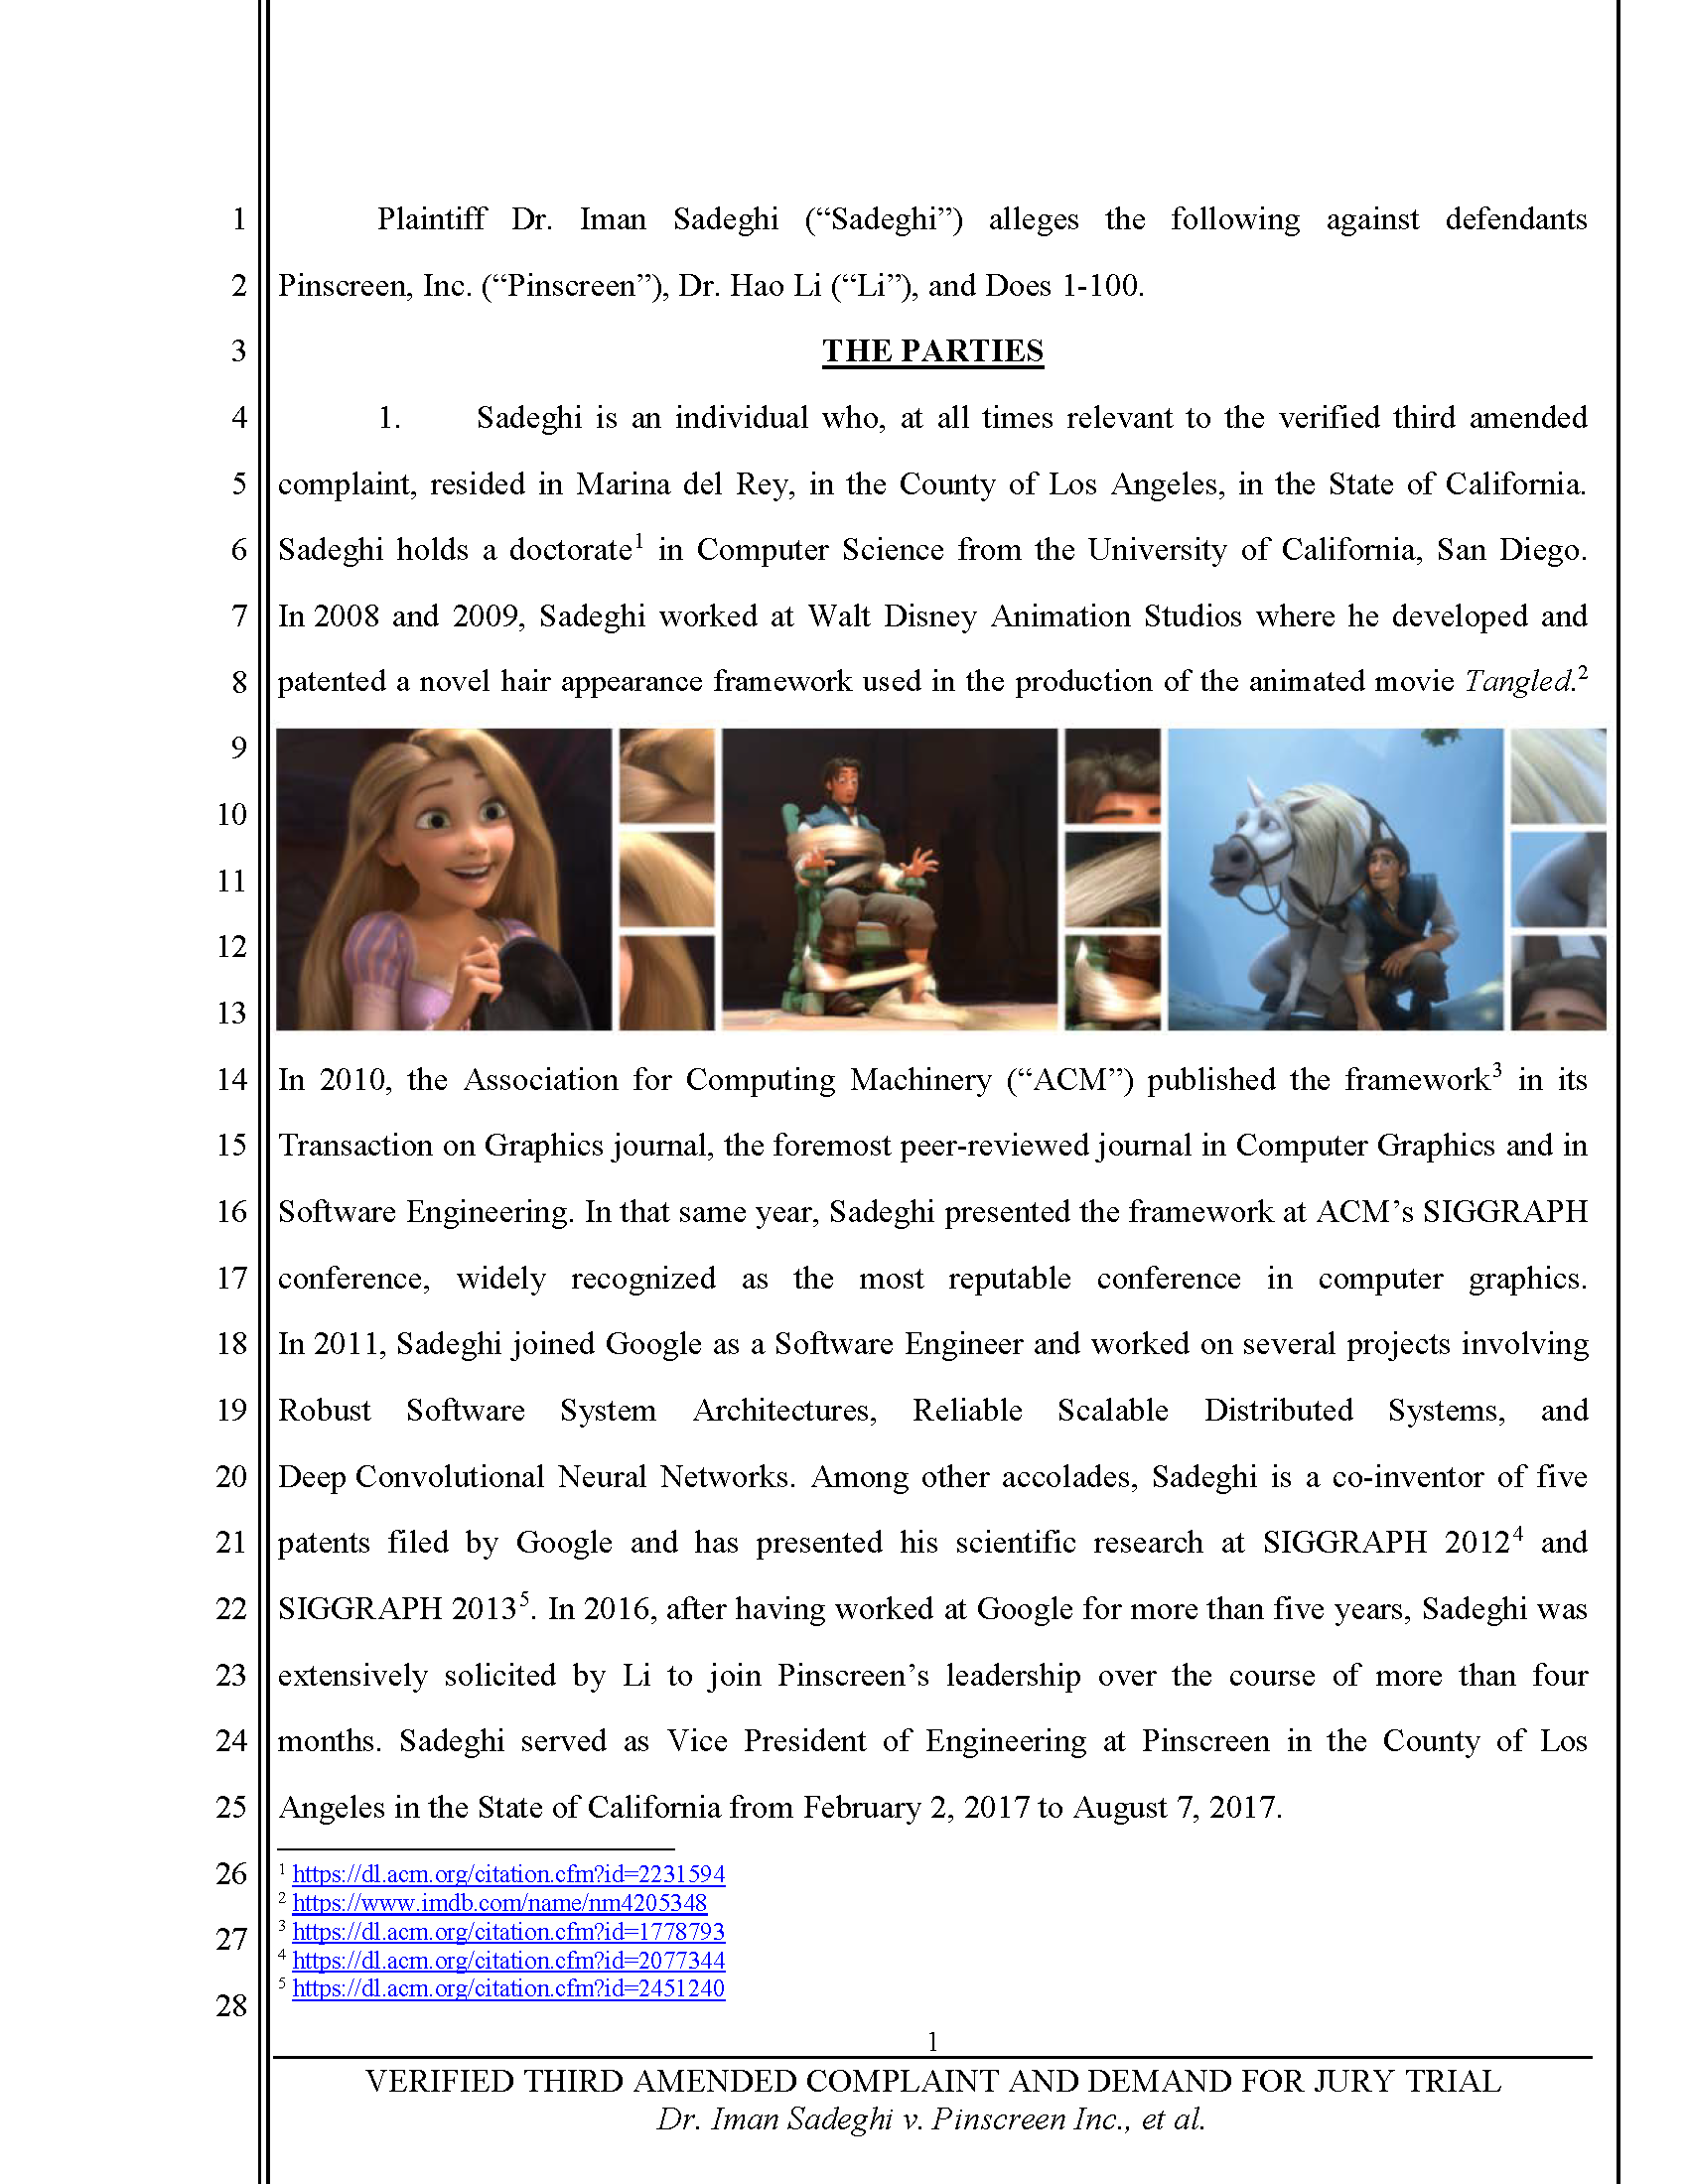 Third Amended Complaint (TAC) Page 2